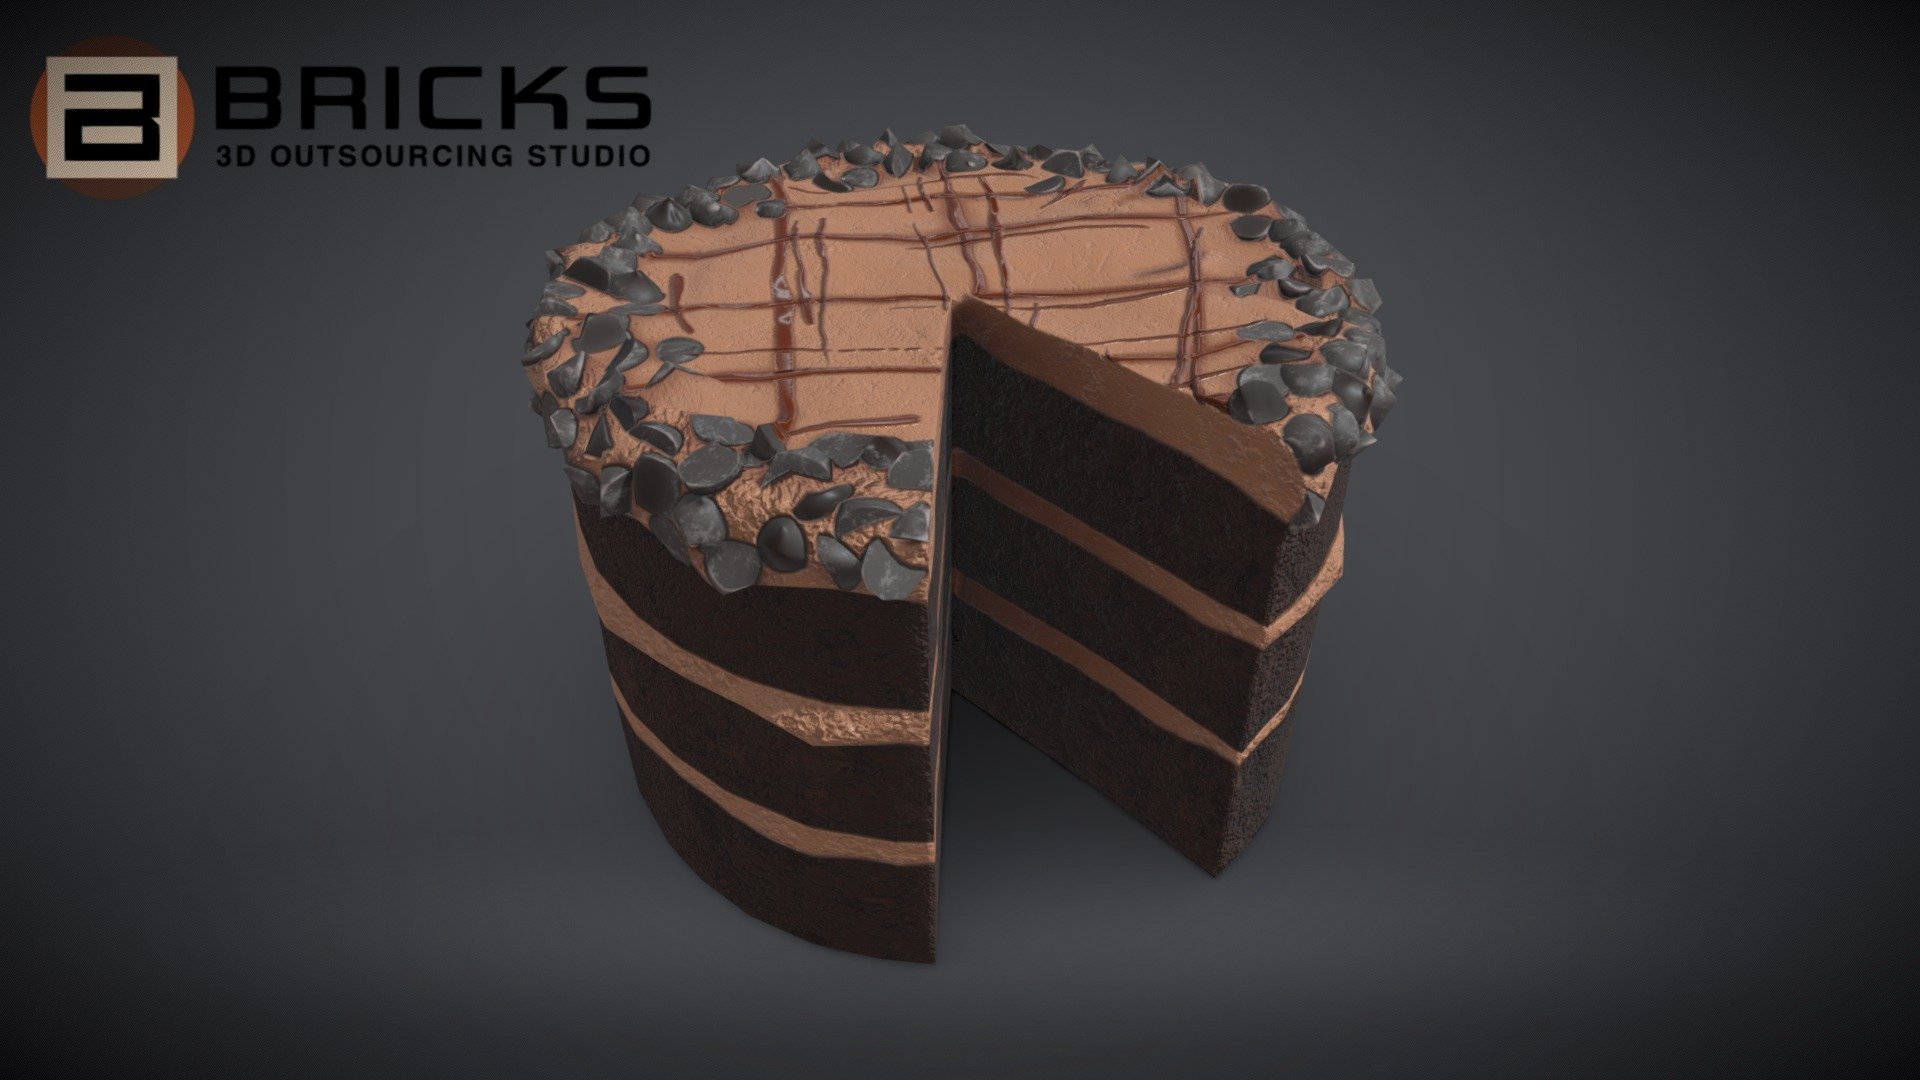 PBR Food Asset:
ChocolateGateau_Chart
Polycount: 1488
Vertex count: 746
Texture Size: 2048px x 2048px
Normal: OpenGL

If you need any adjust in file please contact us: team@bricks3dstudio.com

Hire us: tringuyen@bricks3dstudio.com
Here is us: https://www.bricks3dstudio.com/
        https://www.artstation.com/bricksstudio
        https://www.facebook.com/Bricks3dstudio/
        https://www.linkedin.com/in/bricks-studio-b10462252/ - ChocolateGateauChart - Buy Royalty Free 3D model by Bricks Studio (@bricks3dstudio) 3d model